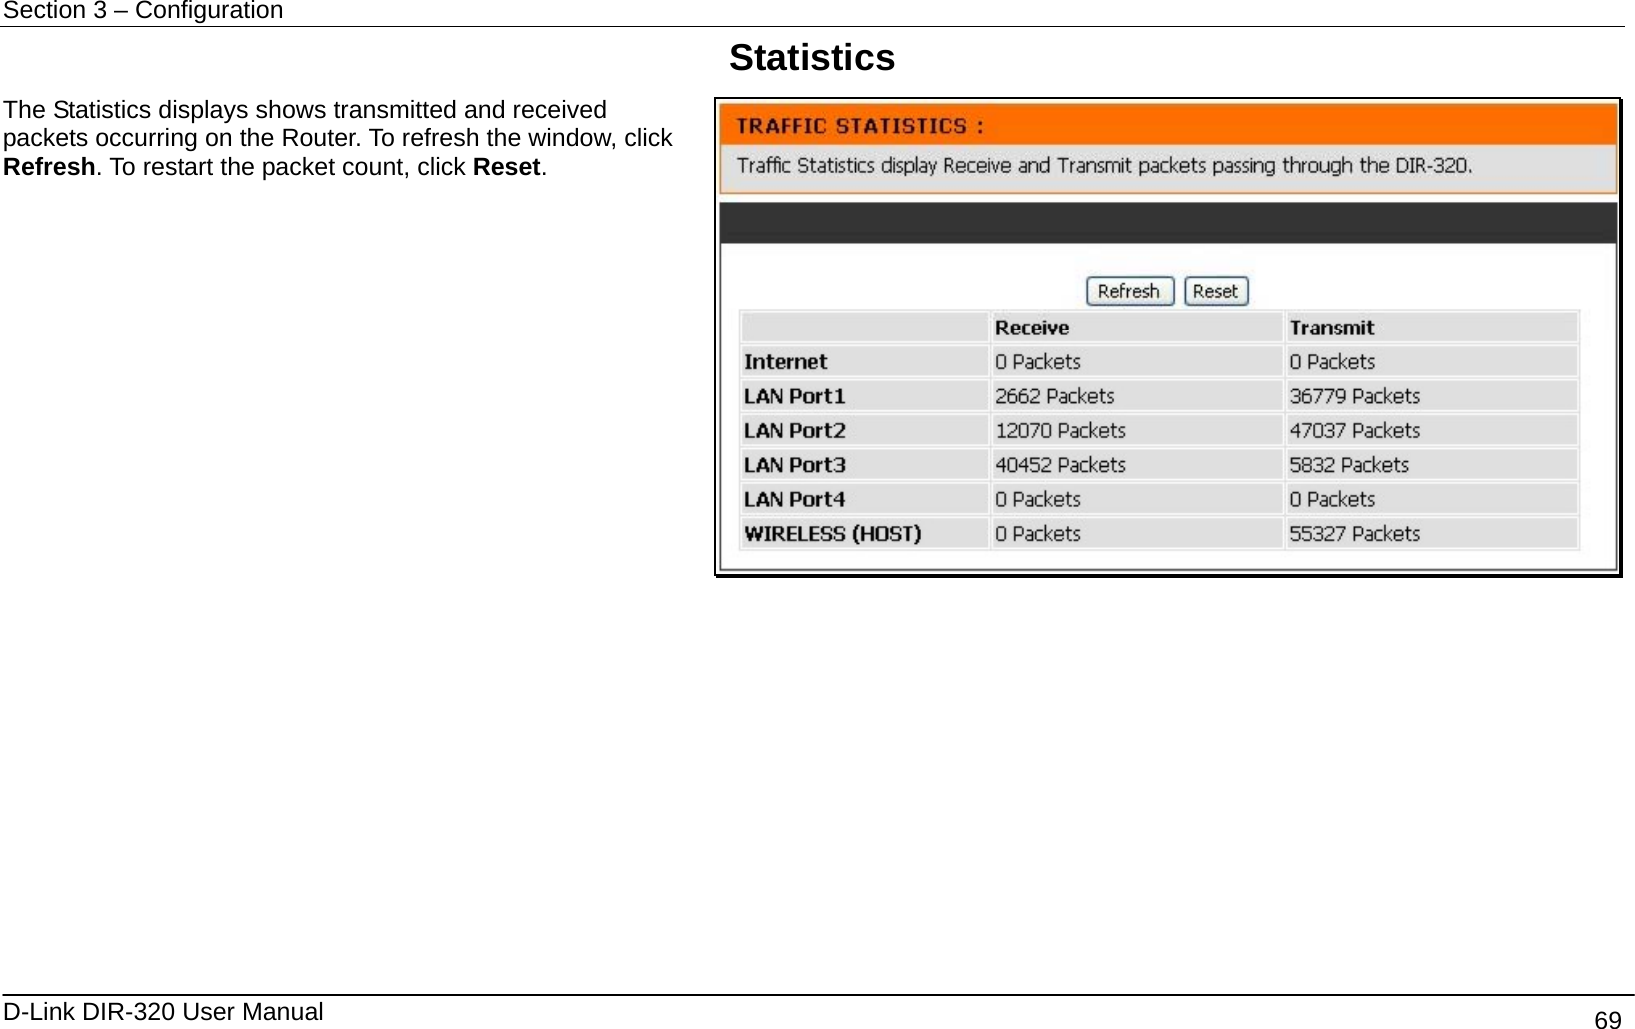 Section 3 – Configuration   D-Link DIR-320 User Manual                                       69 Statistics The Statistics displays shows transmitted and received packets occurring on the Router. To refresh the window, click Refresh. To restart the packet count, click Reset.              